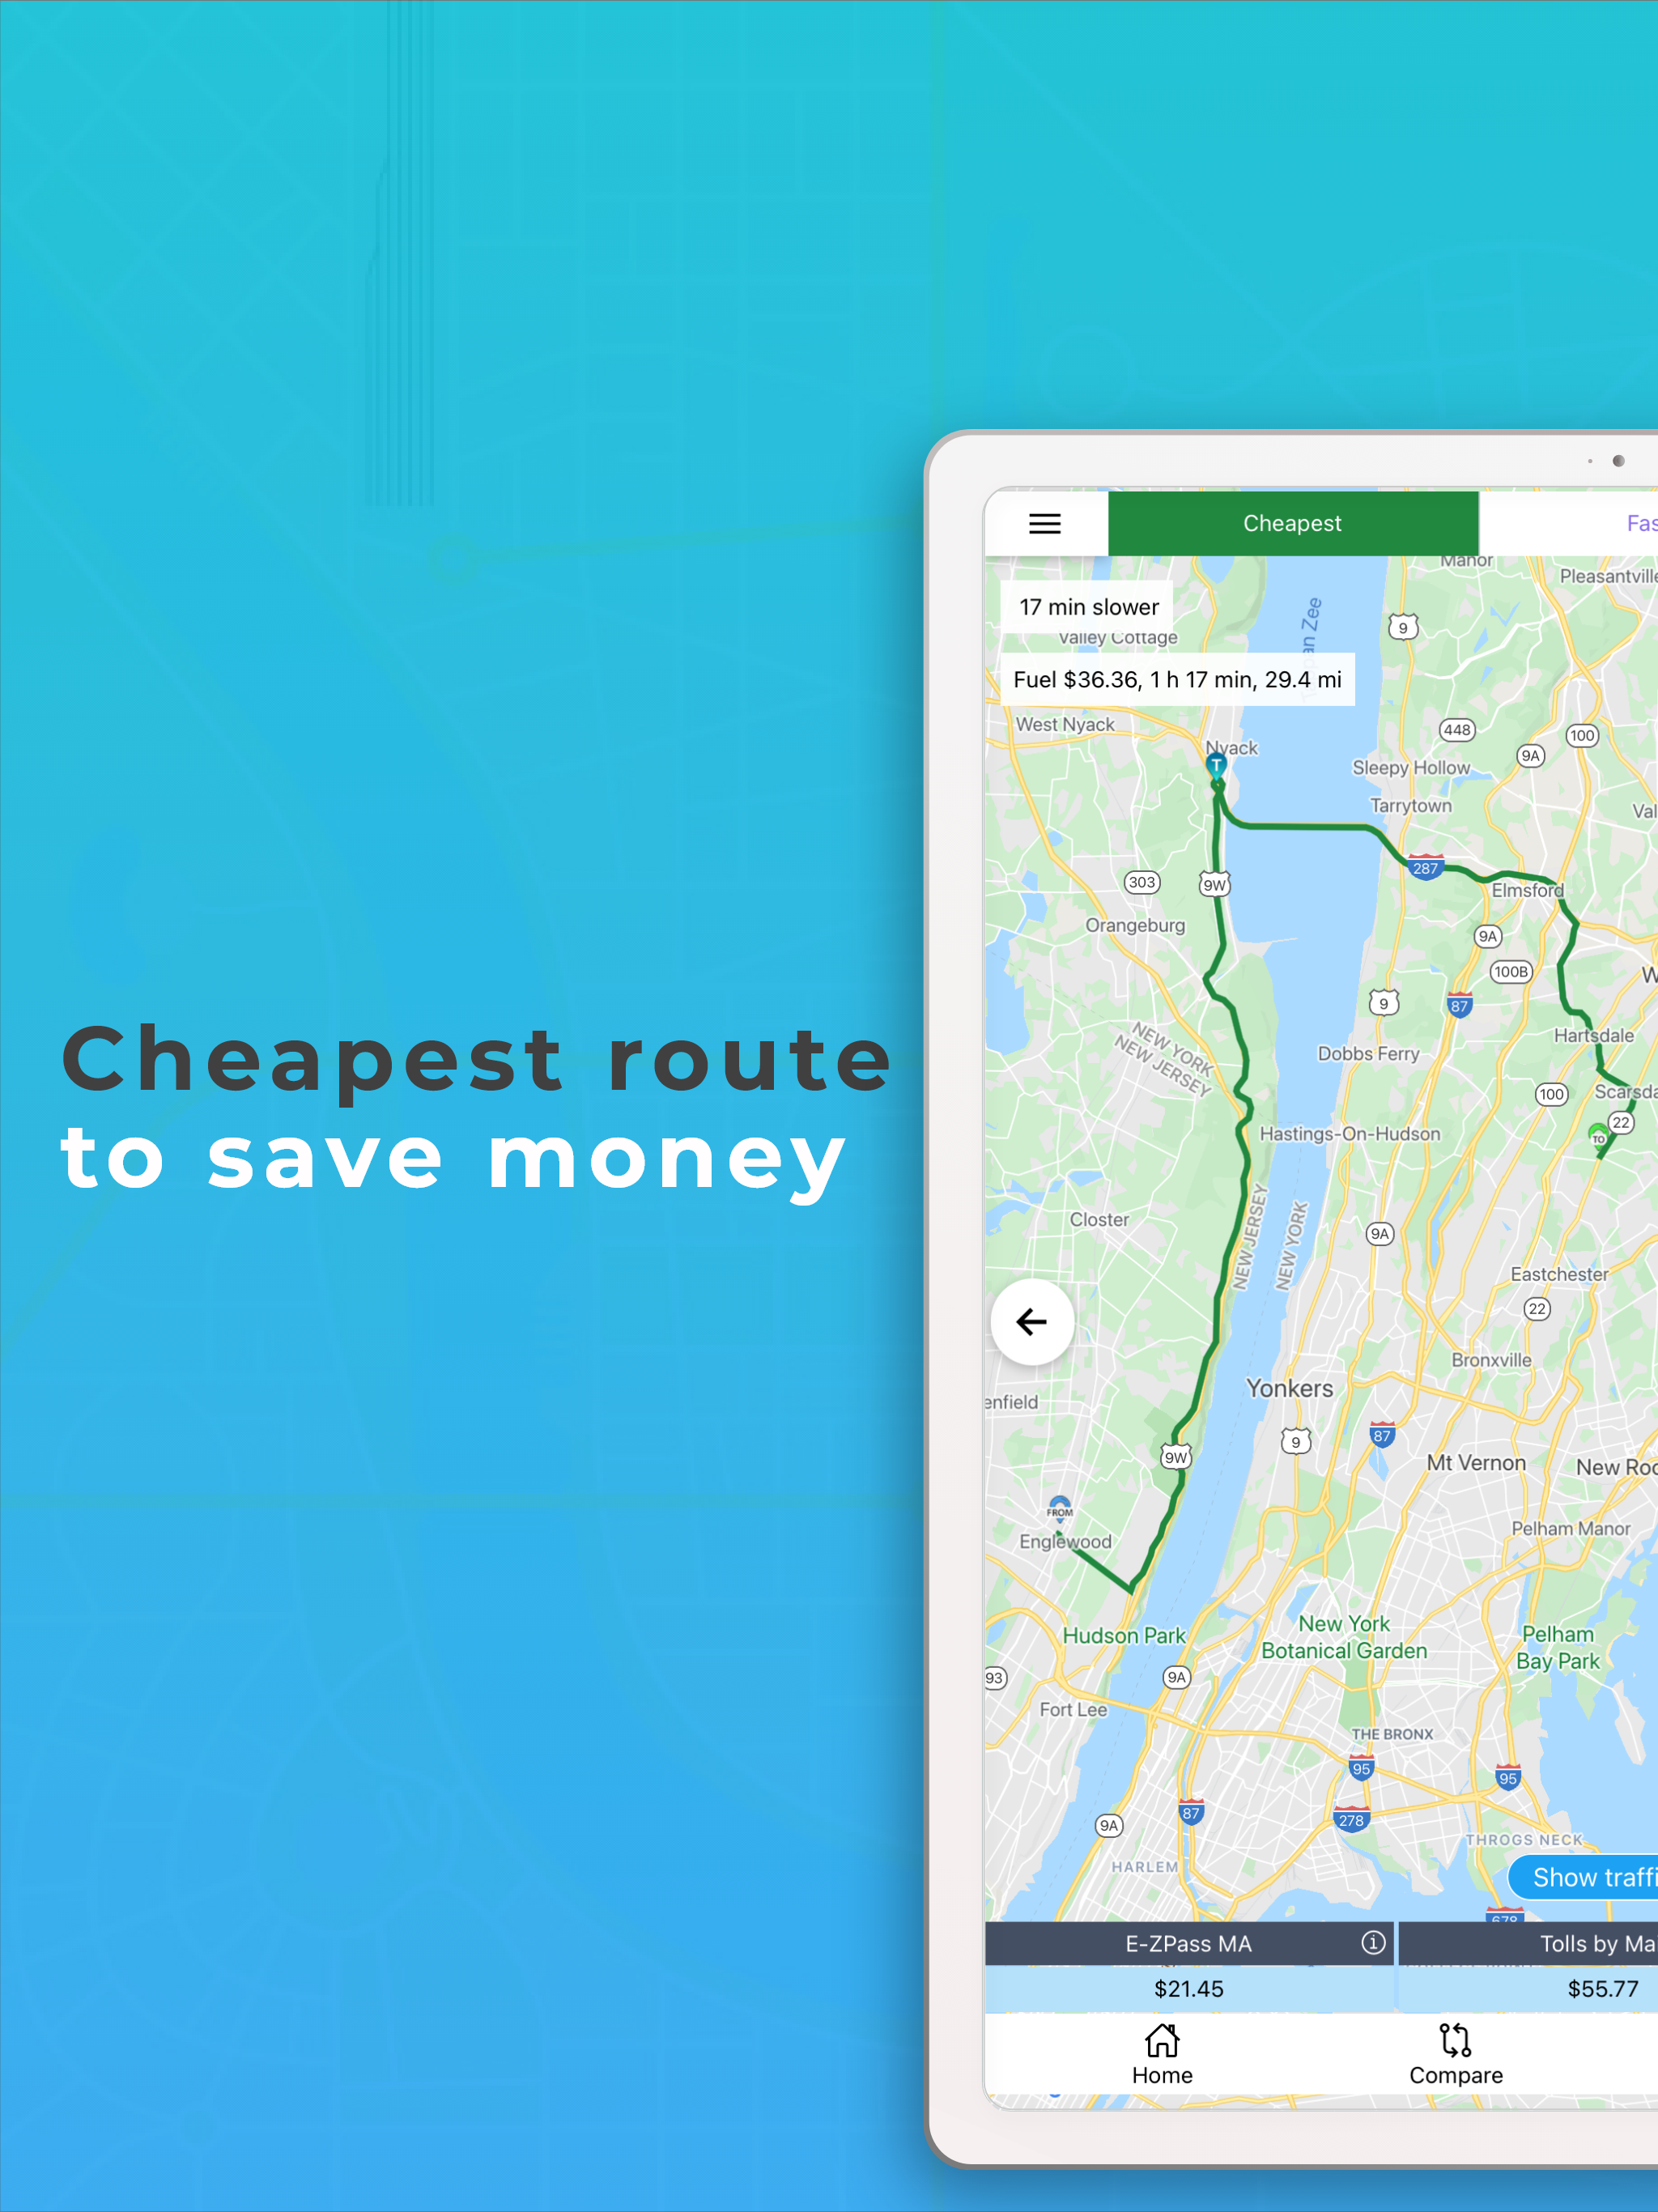 See cheapest route and save money